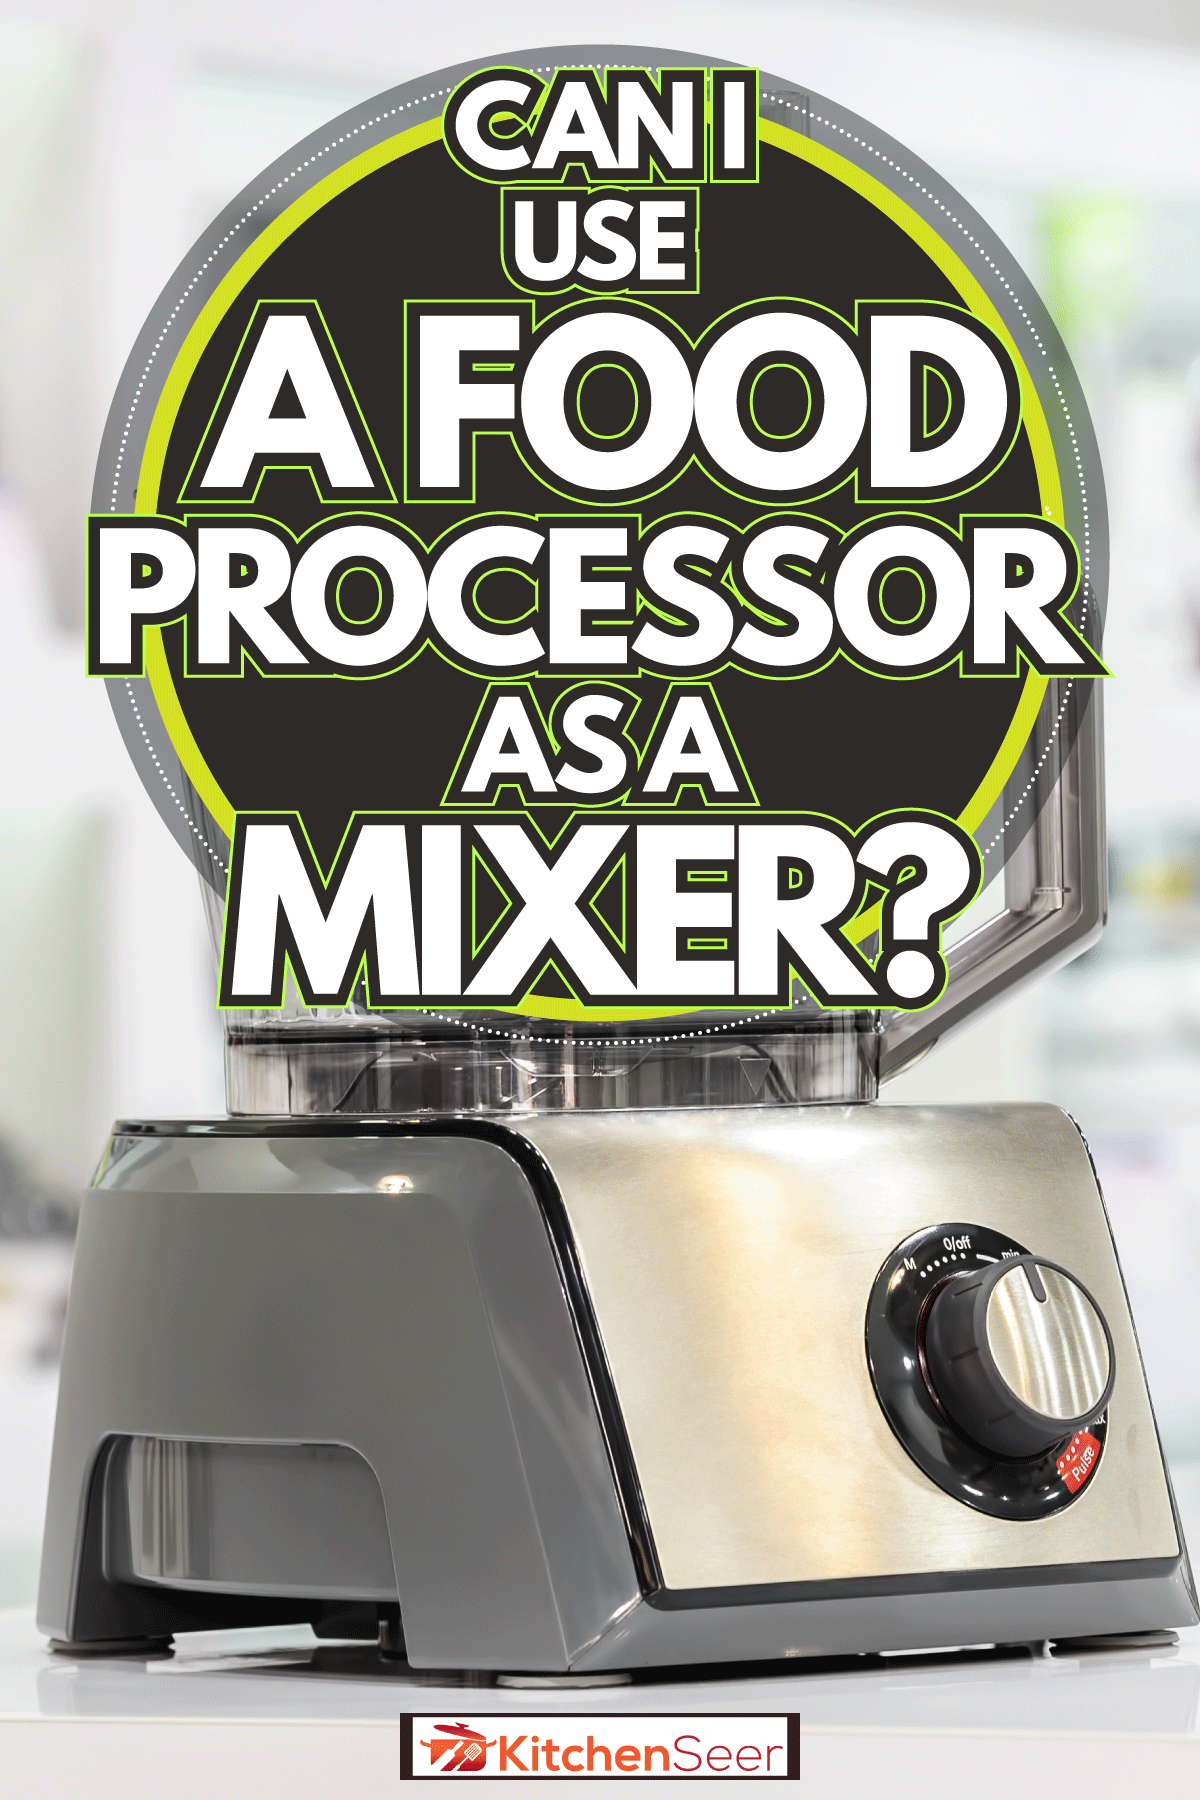 single electric food processor at retail store shelf, Can I Use A Food Processor As A Mixer?